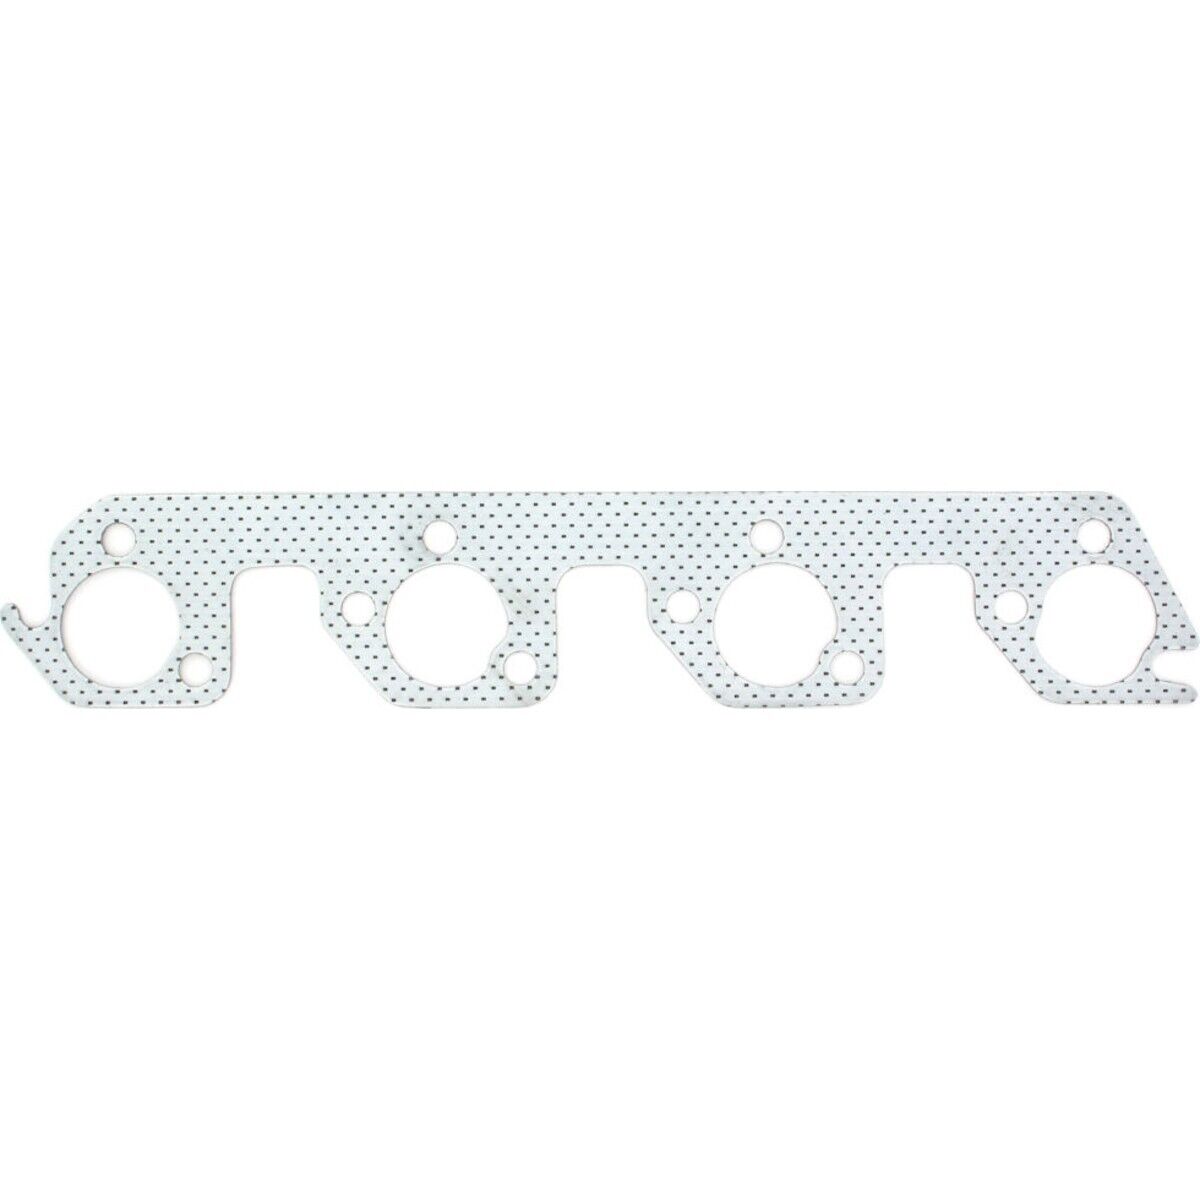 AMS4232 APEX Set Exhaust Manifold Gaskets for Mustang Pickup Ford Ranger LTD II